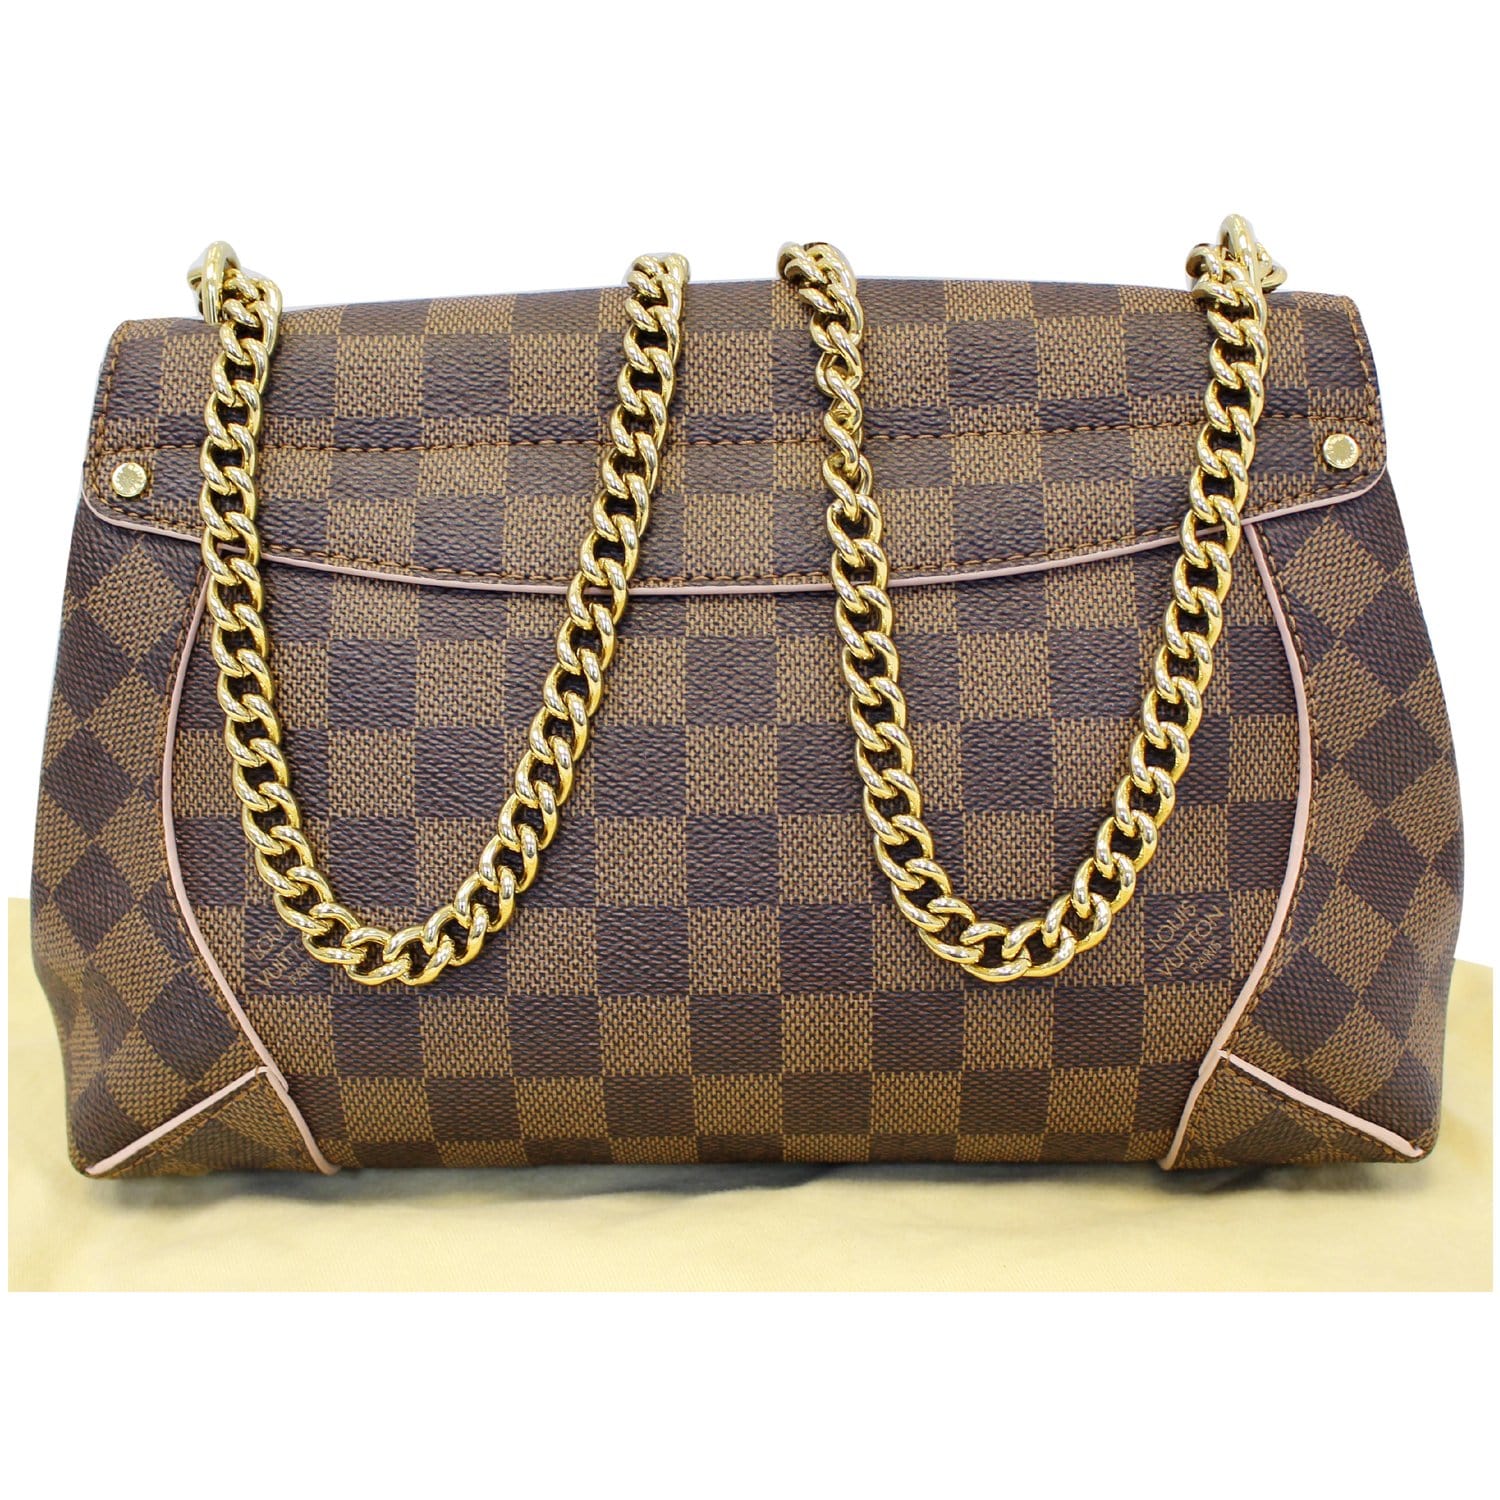 Used Twice! Louis Vuitton Damier Ebene Daily Pouch Clutch Rose